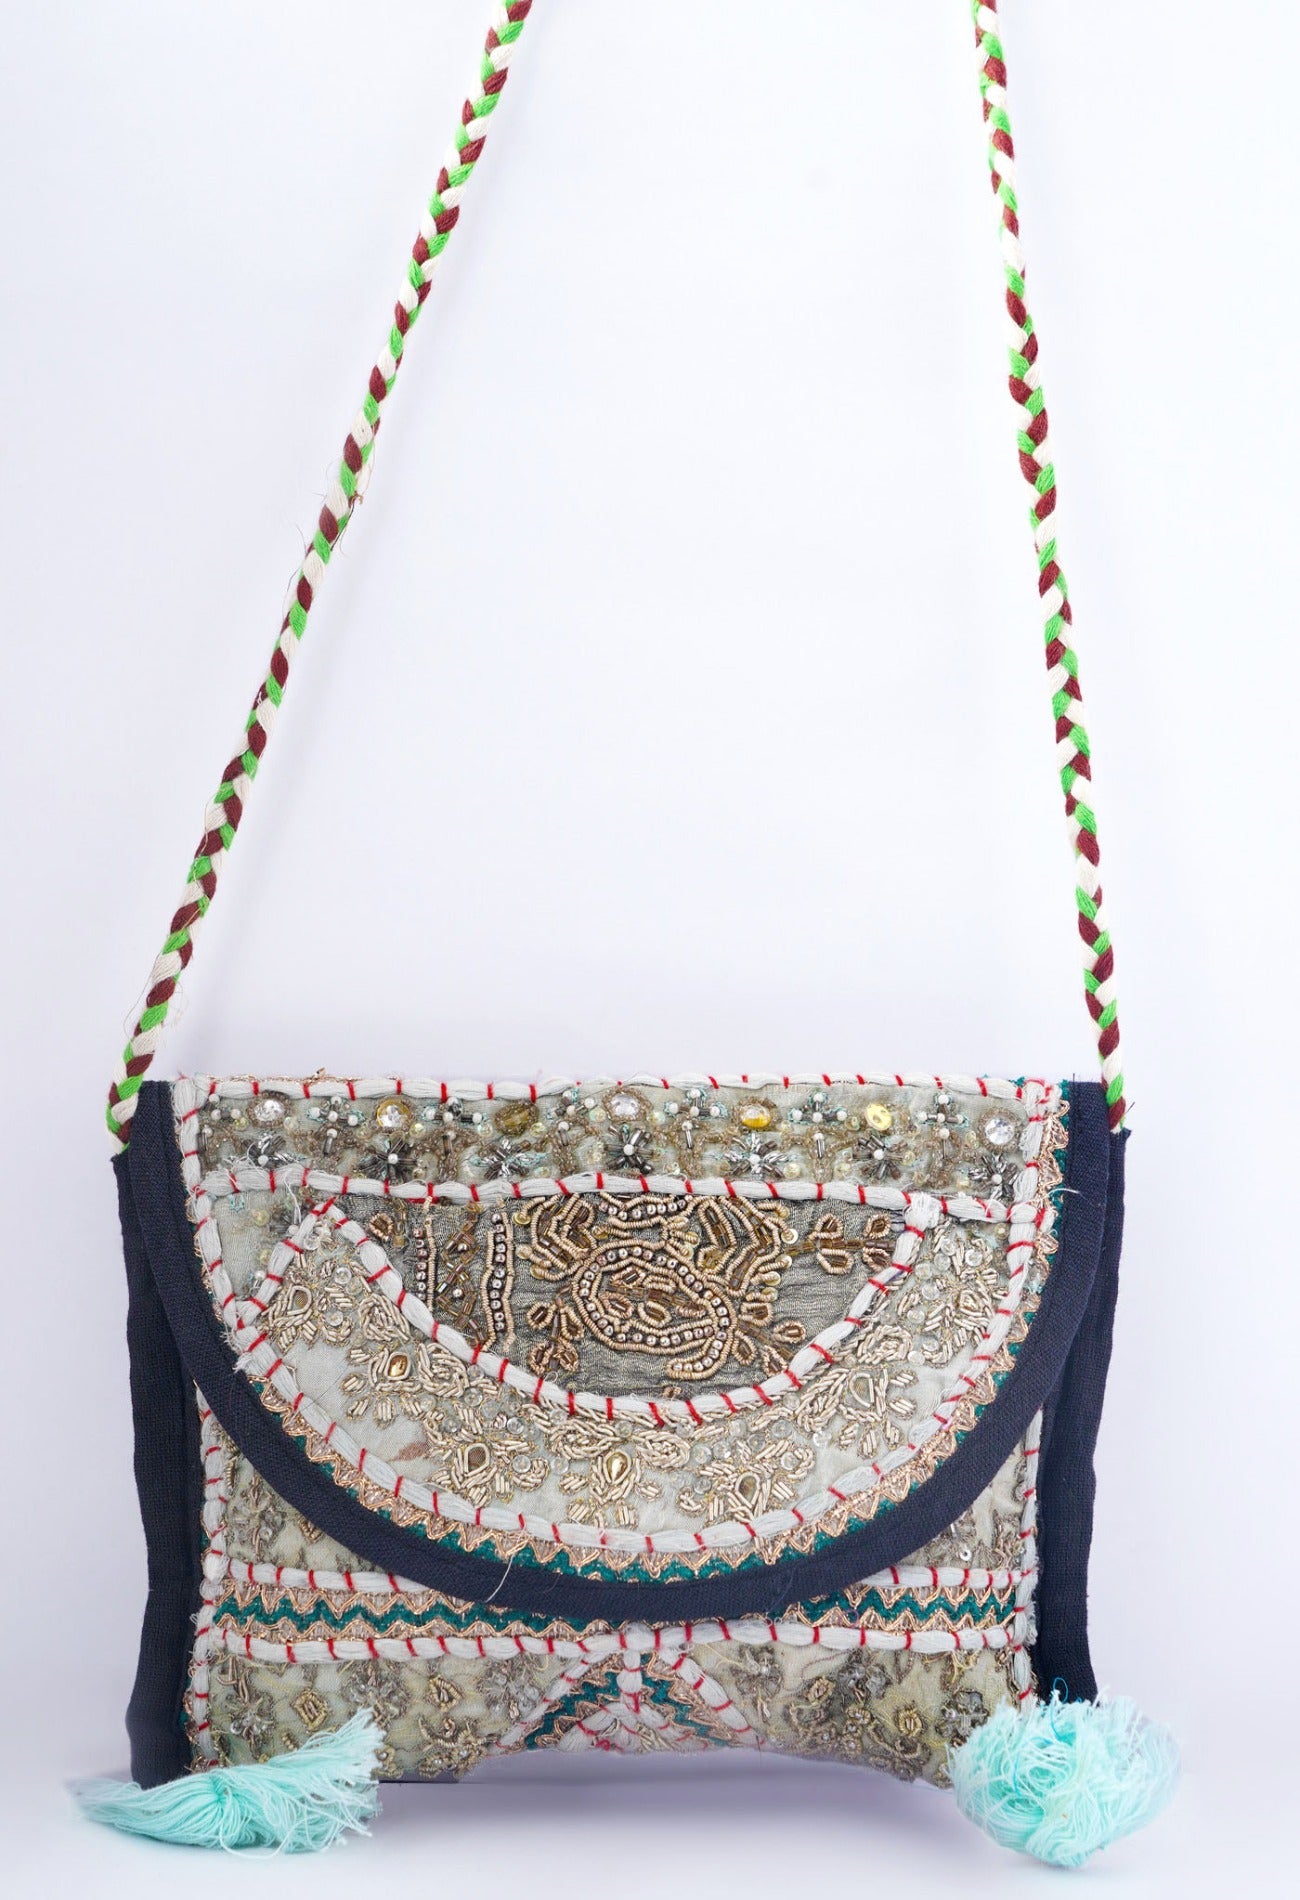 Online Shopping for Ivory Indian Handicraft Embroidered Hand Bag with Weaving from Rajasthan at Unnatisilks.com India_x000D_
Online Shopping for Ivory Indian Handicraft Embroidered Hand Bag with Weaving from Rajasthan at Unnatisilks.com India_x000D_
